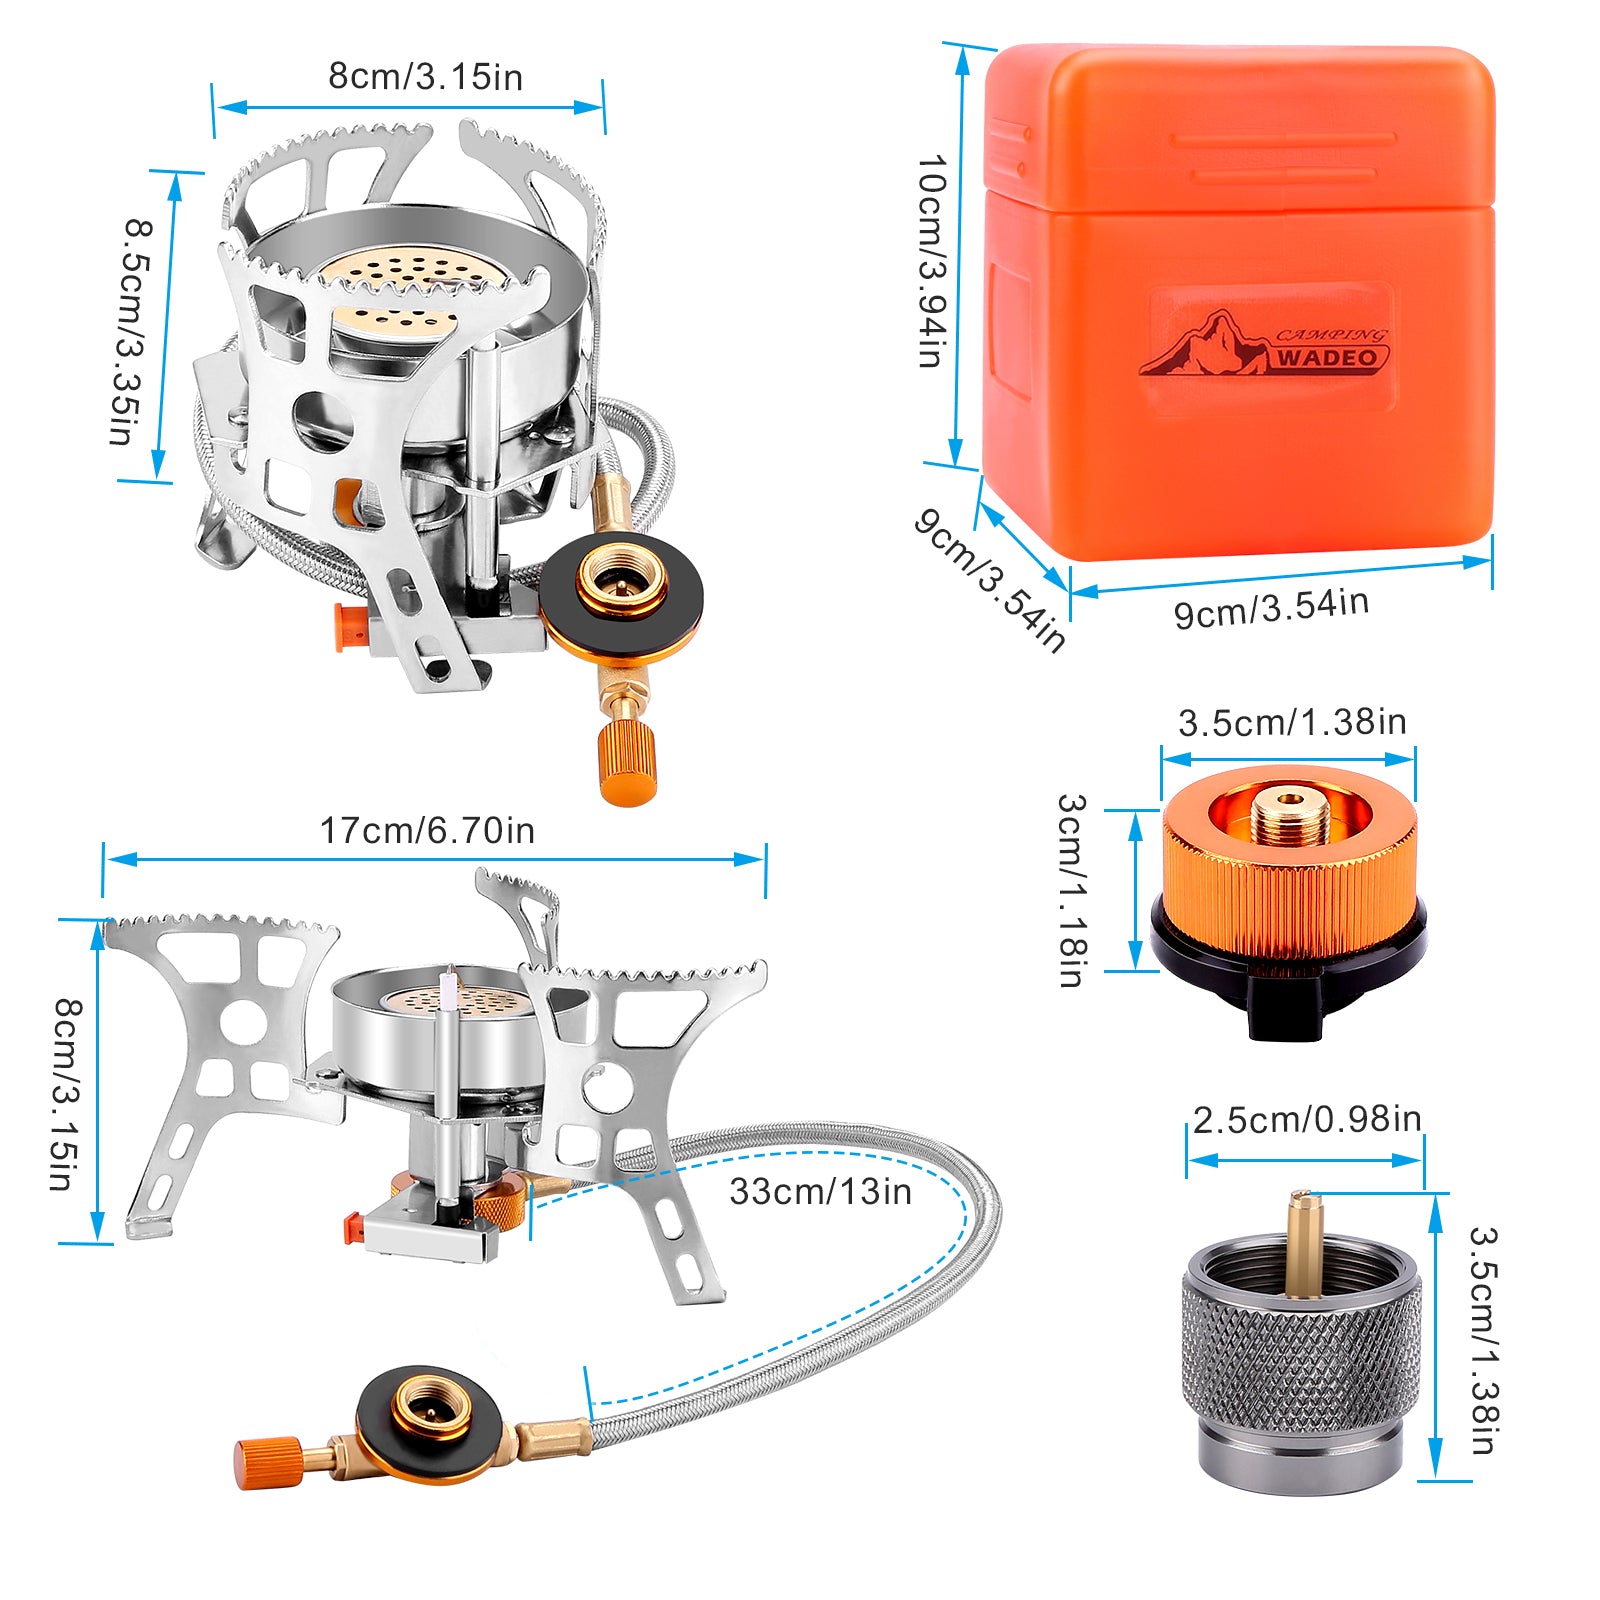 WADEO Portable Backpacking Stove, 3900W Windproof Camping Gas Stove with Piezo Ignition, 1LB Propane Tank Adapter, Butane Adapter for Outdoor Camping, Hiking and Picnic